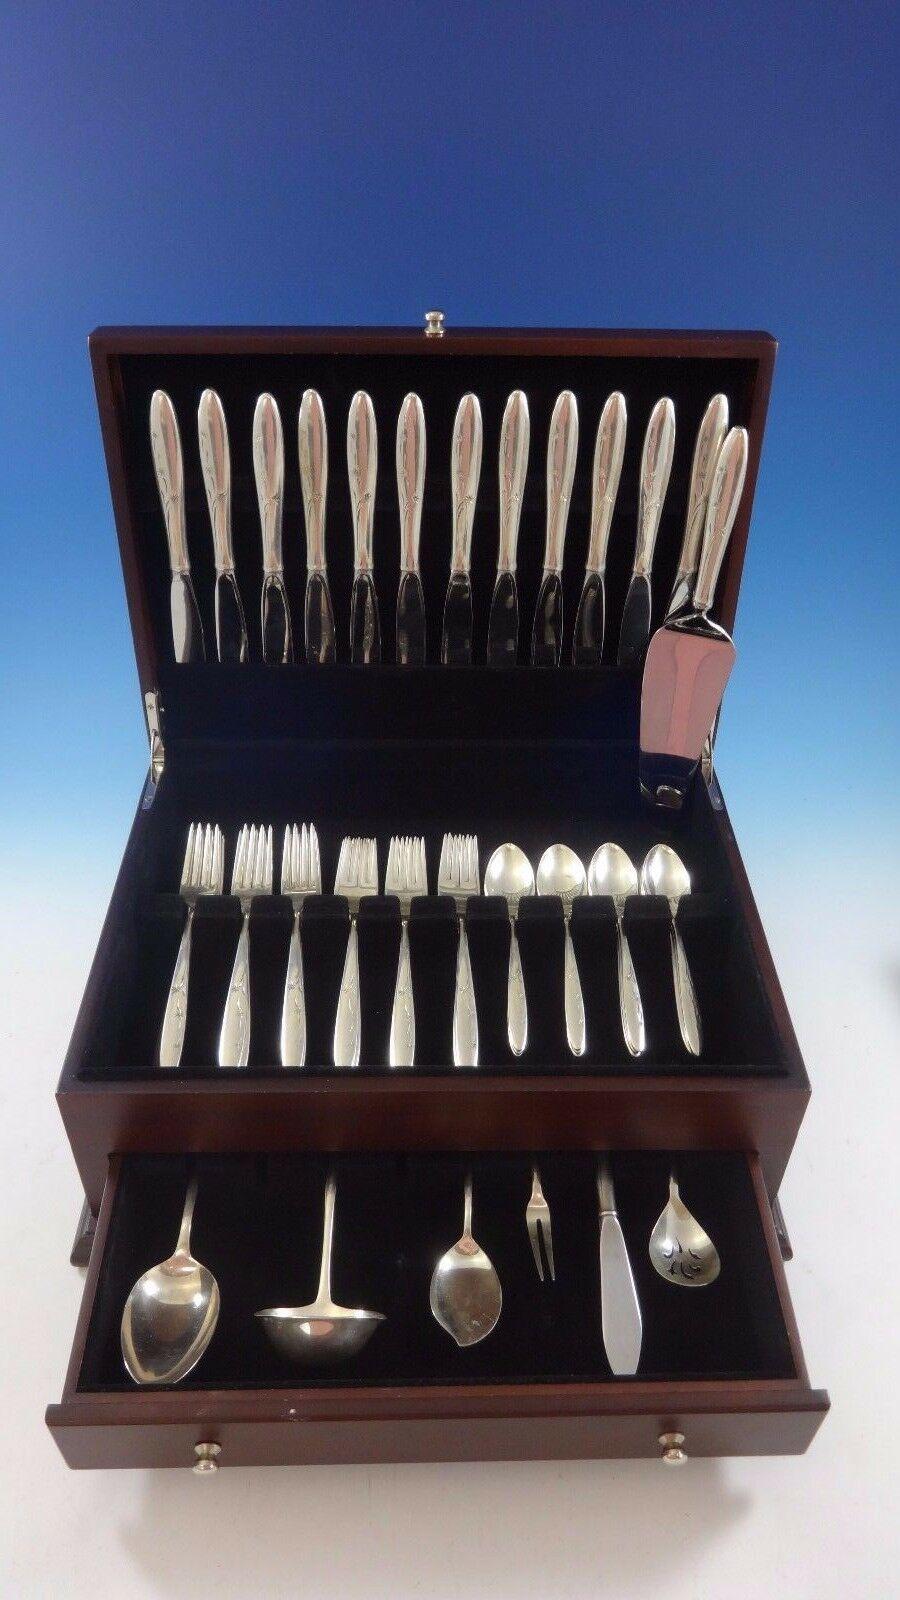 Mid-Century Modern Celeste by Gorham, circa 1956 sterling silver flatware set of 55 pieces. This set includes:

12 knives, 9 3/8